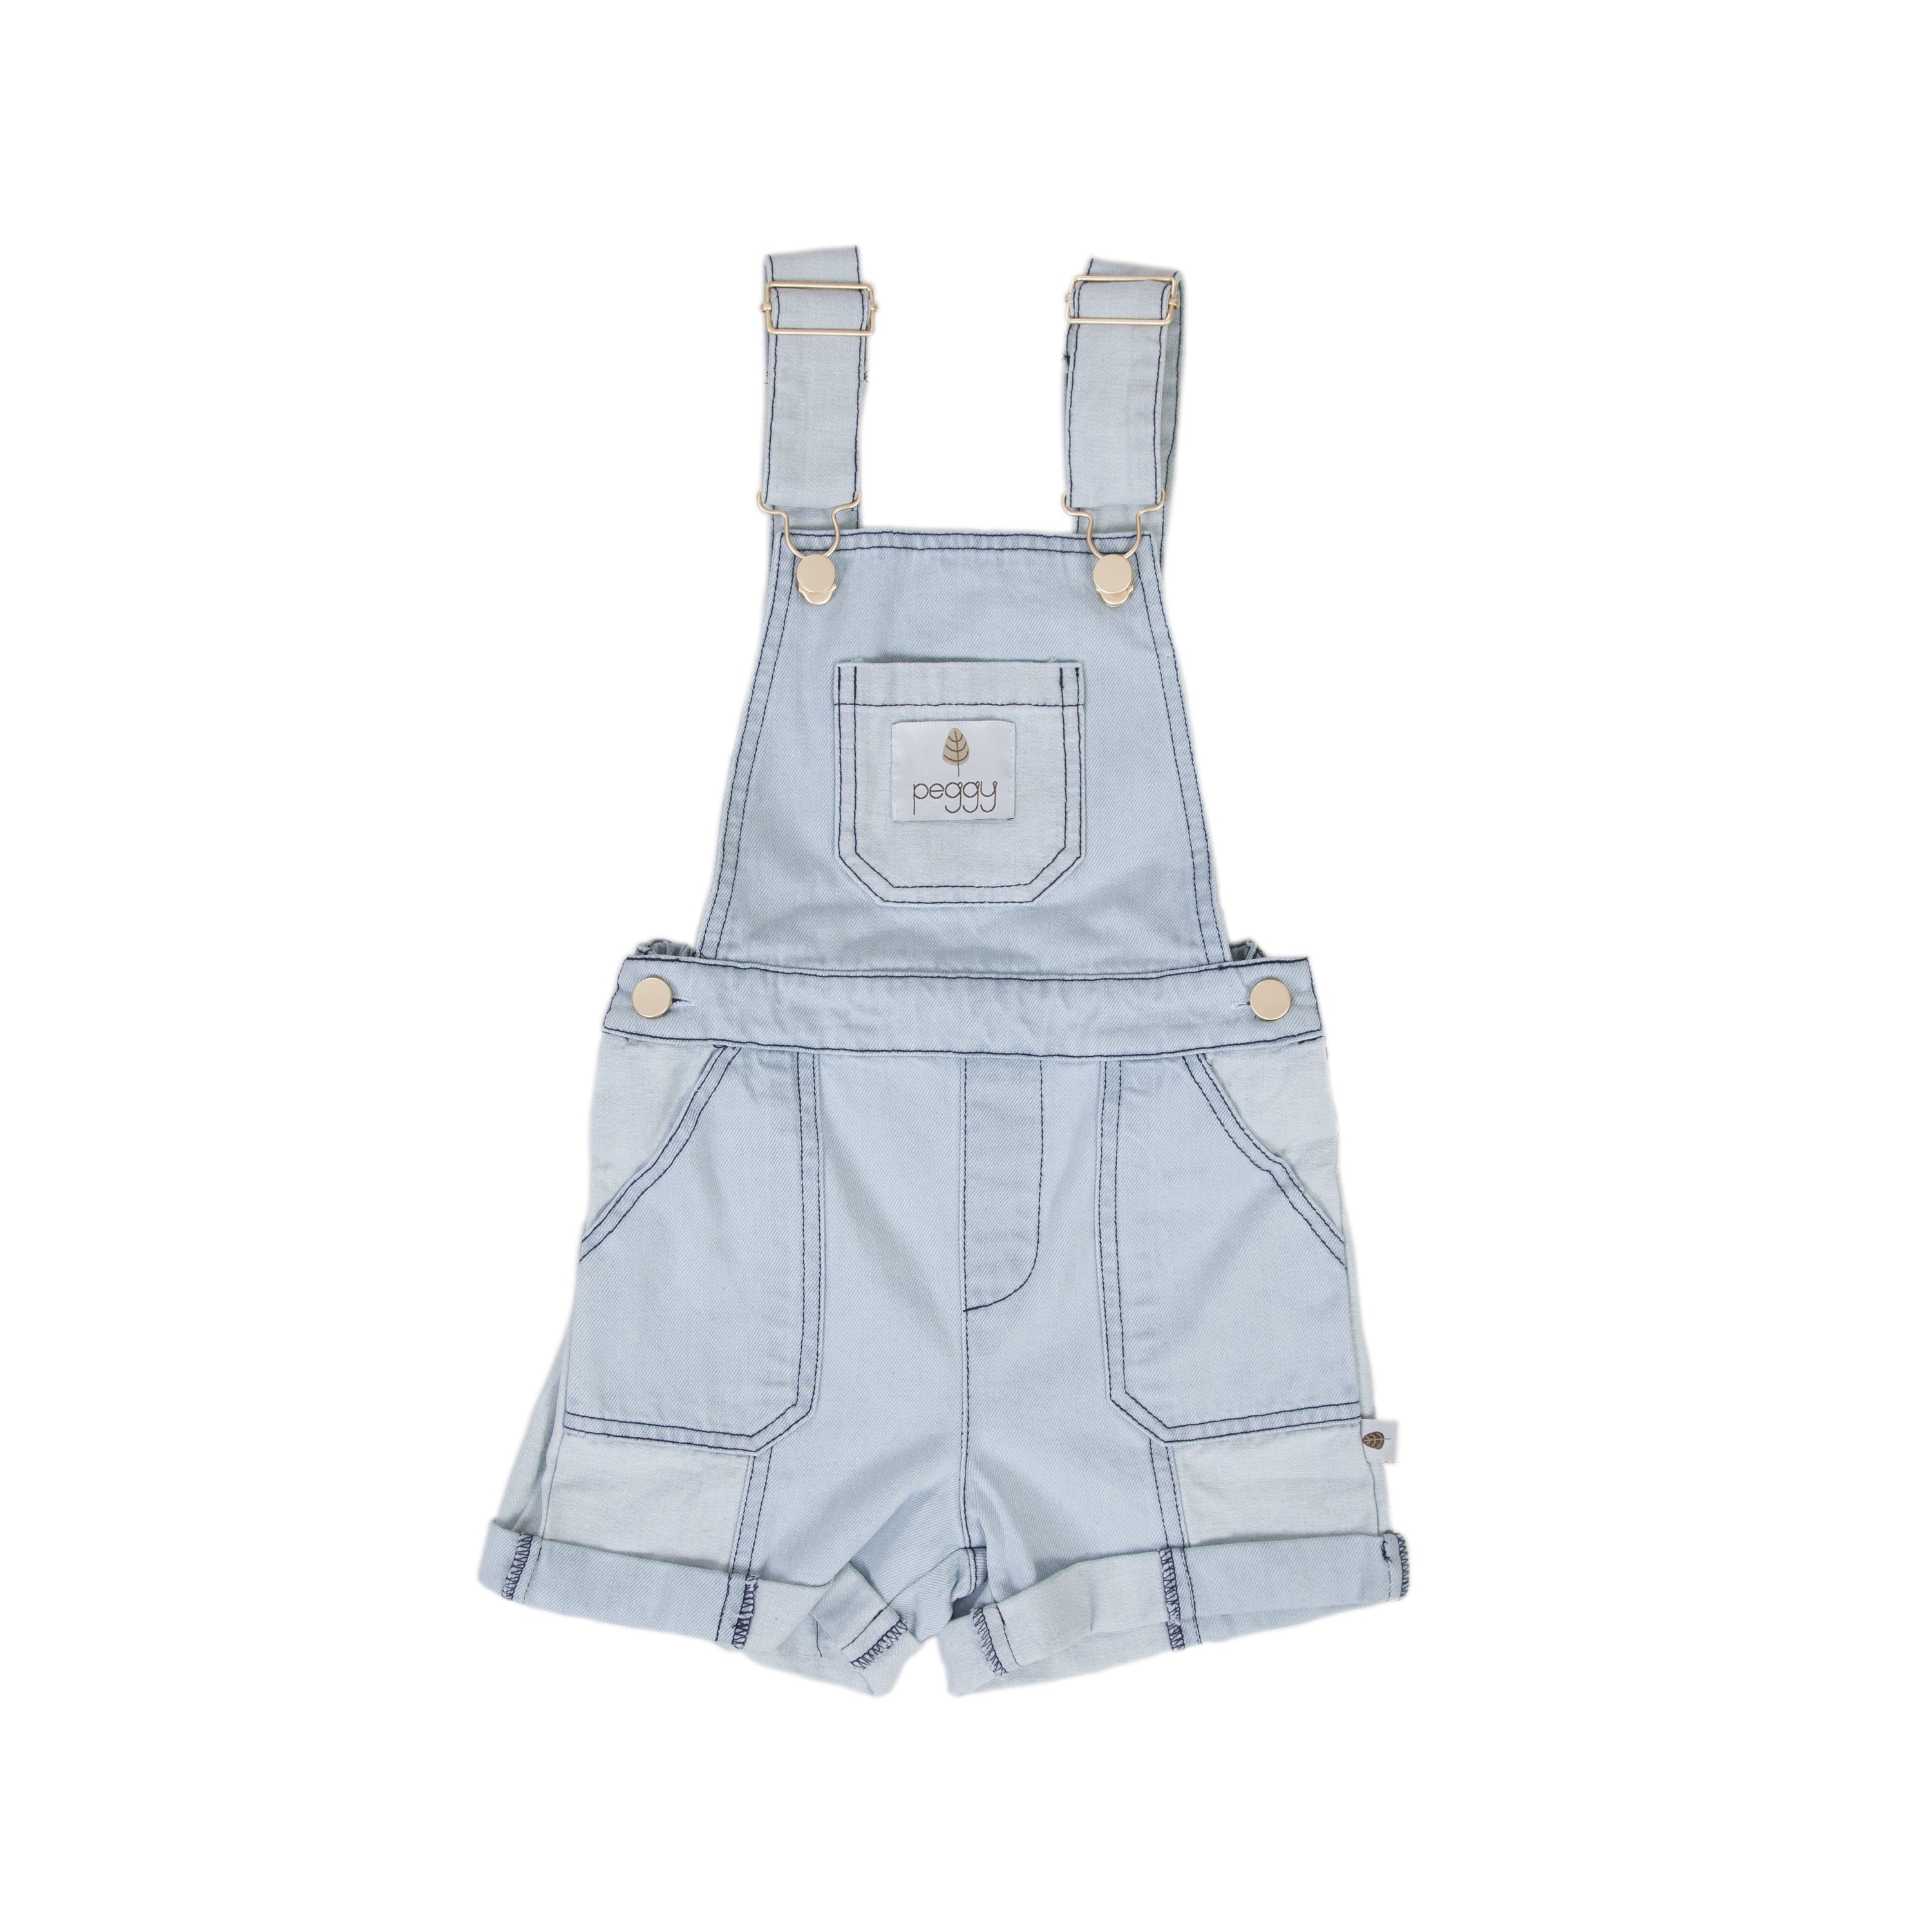 Peggy - Feather Overalls